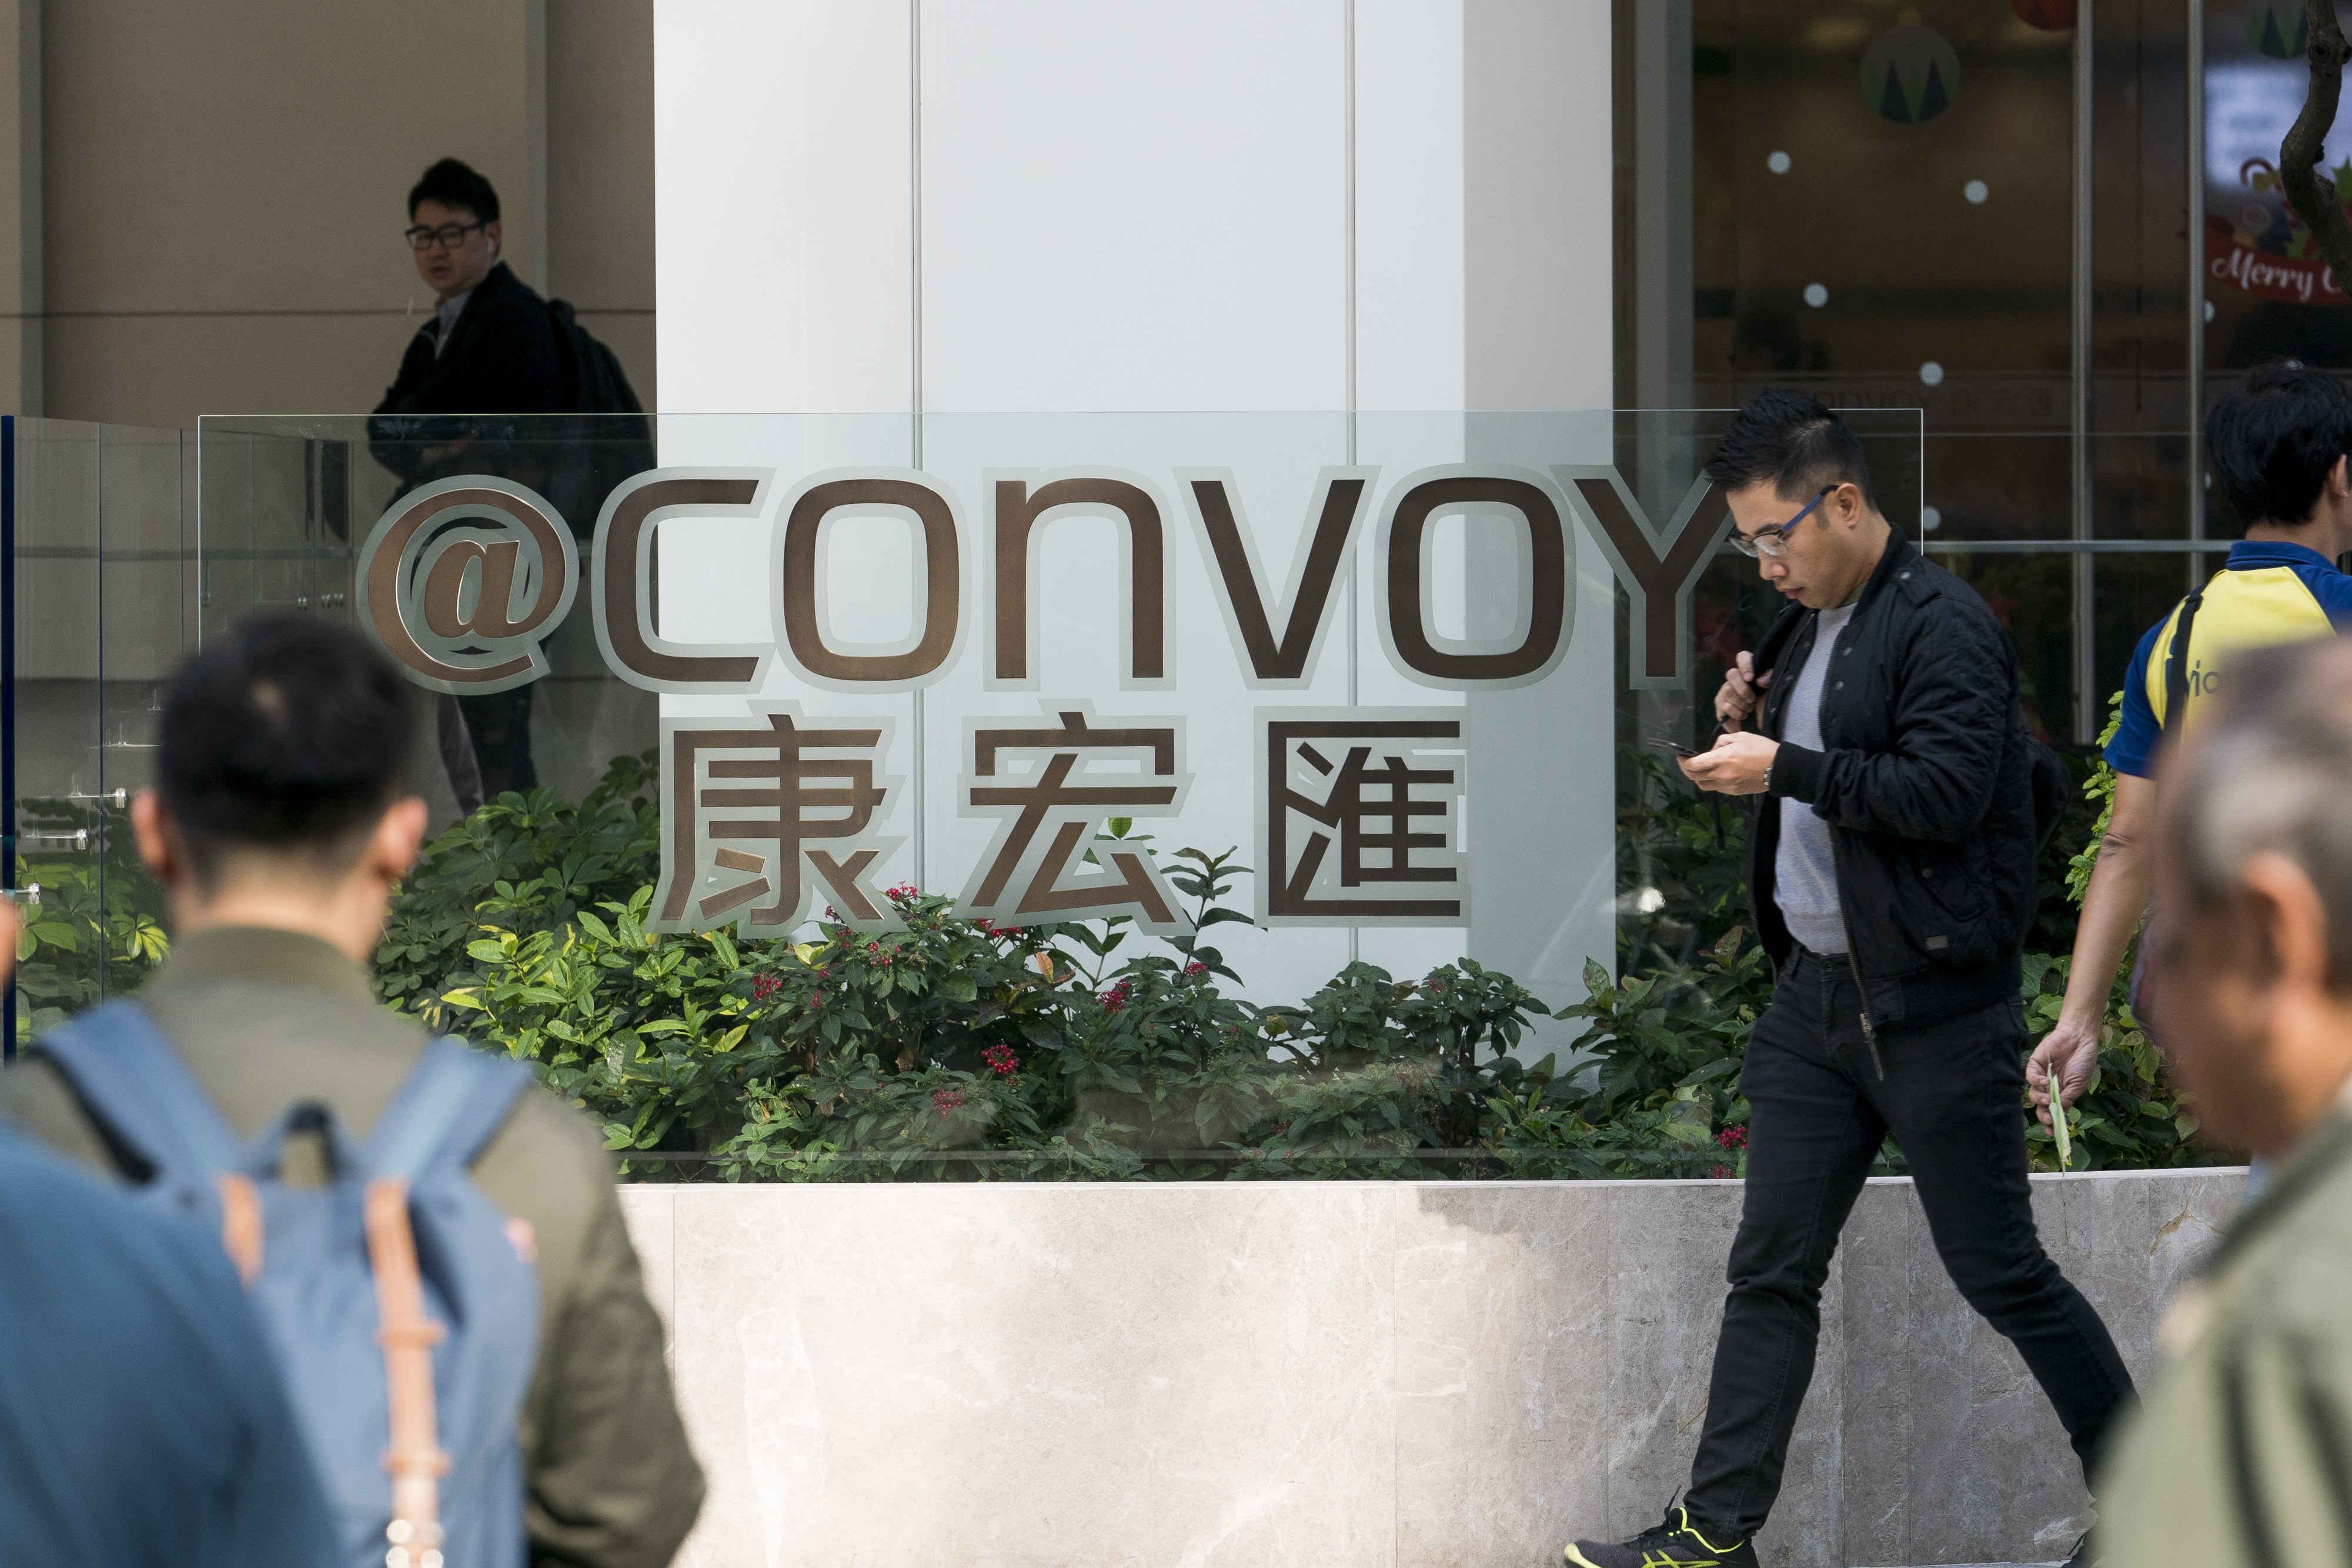 Pedestrians walk past the "@Convoy" building, which houses the headquarters of Convoy Global Holdings. Convoy has confirmed that three executive directors were arrested by the anti-corruption agency, including Chairman Wong Lee Man, according to a filing last week. Photo: Bloomberg